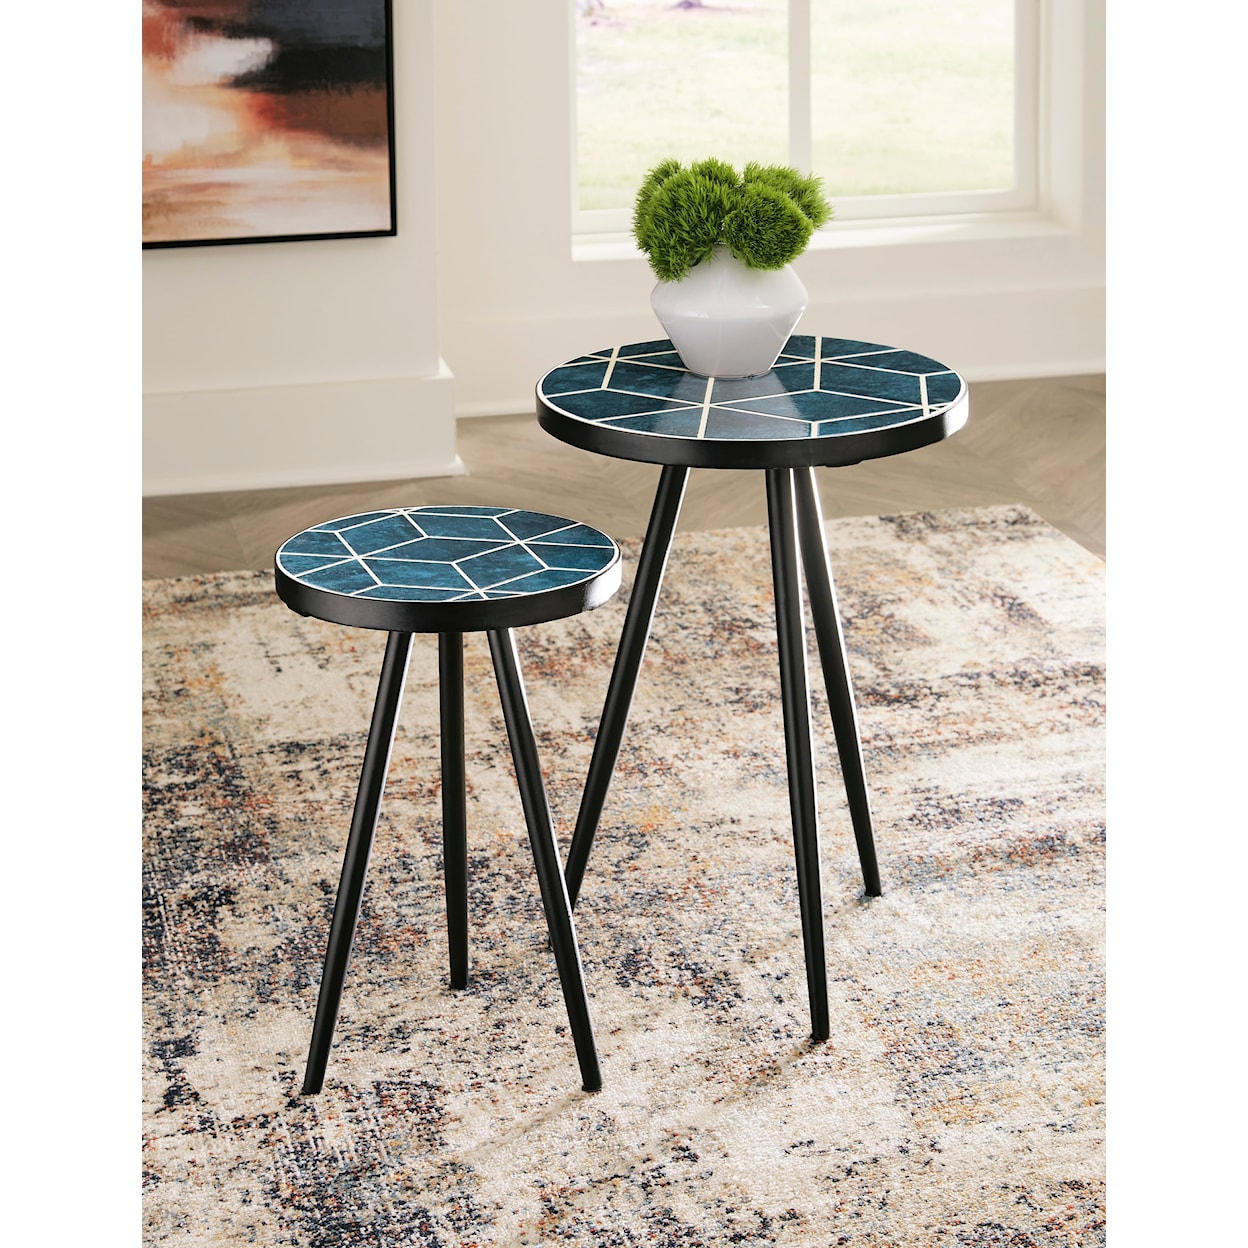 Benchcraft Clairbelle Accent Table (Set of 2)